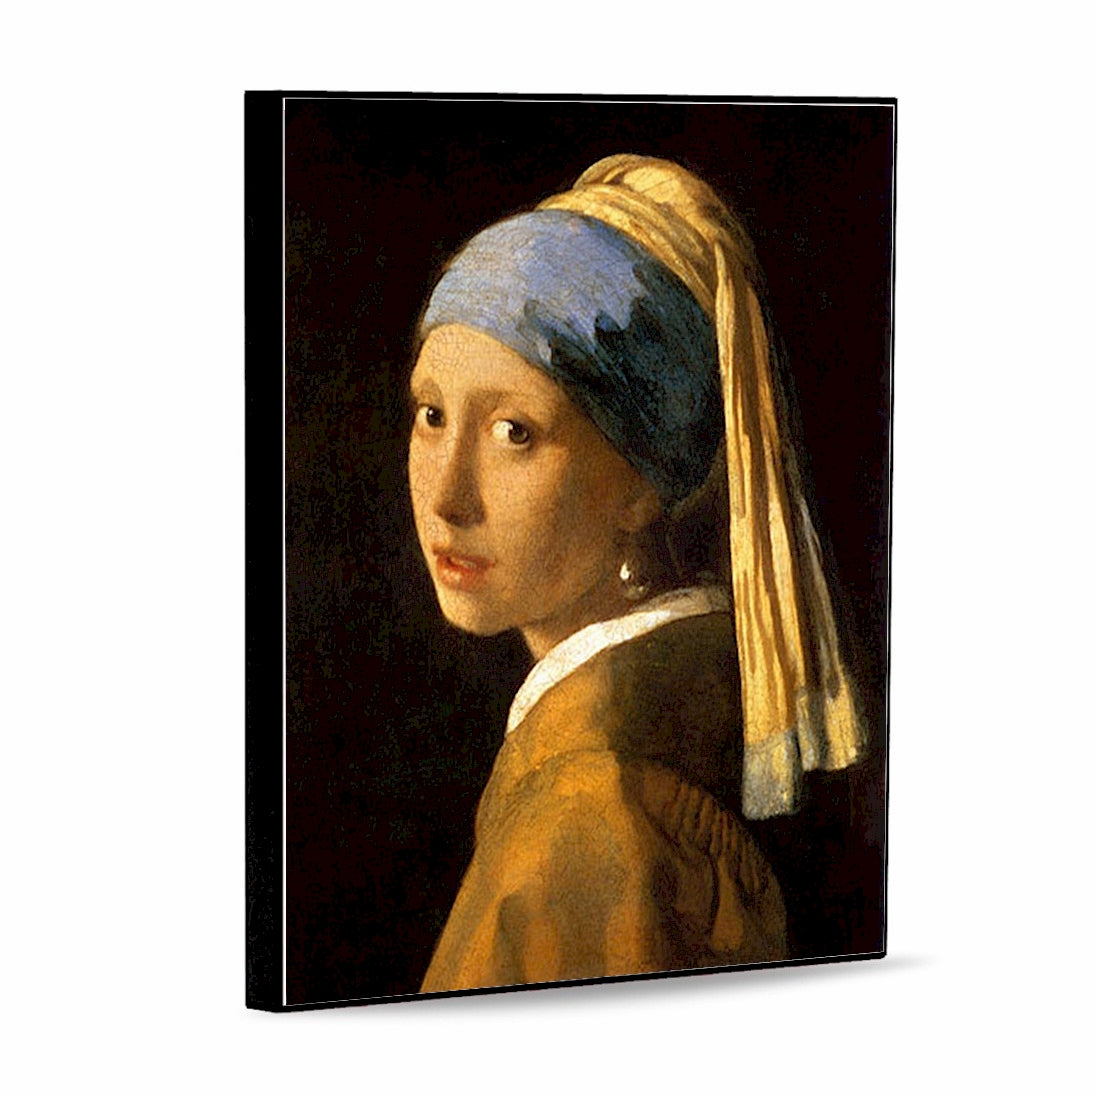 AFFRESCO: Panel Tile - Opera "Girl with a Pearl Earring" by Johannes Vermeer (8x10)